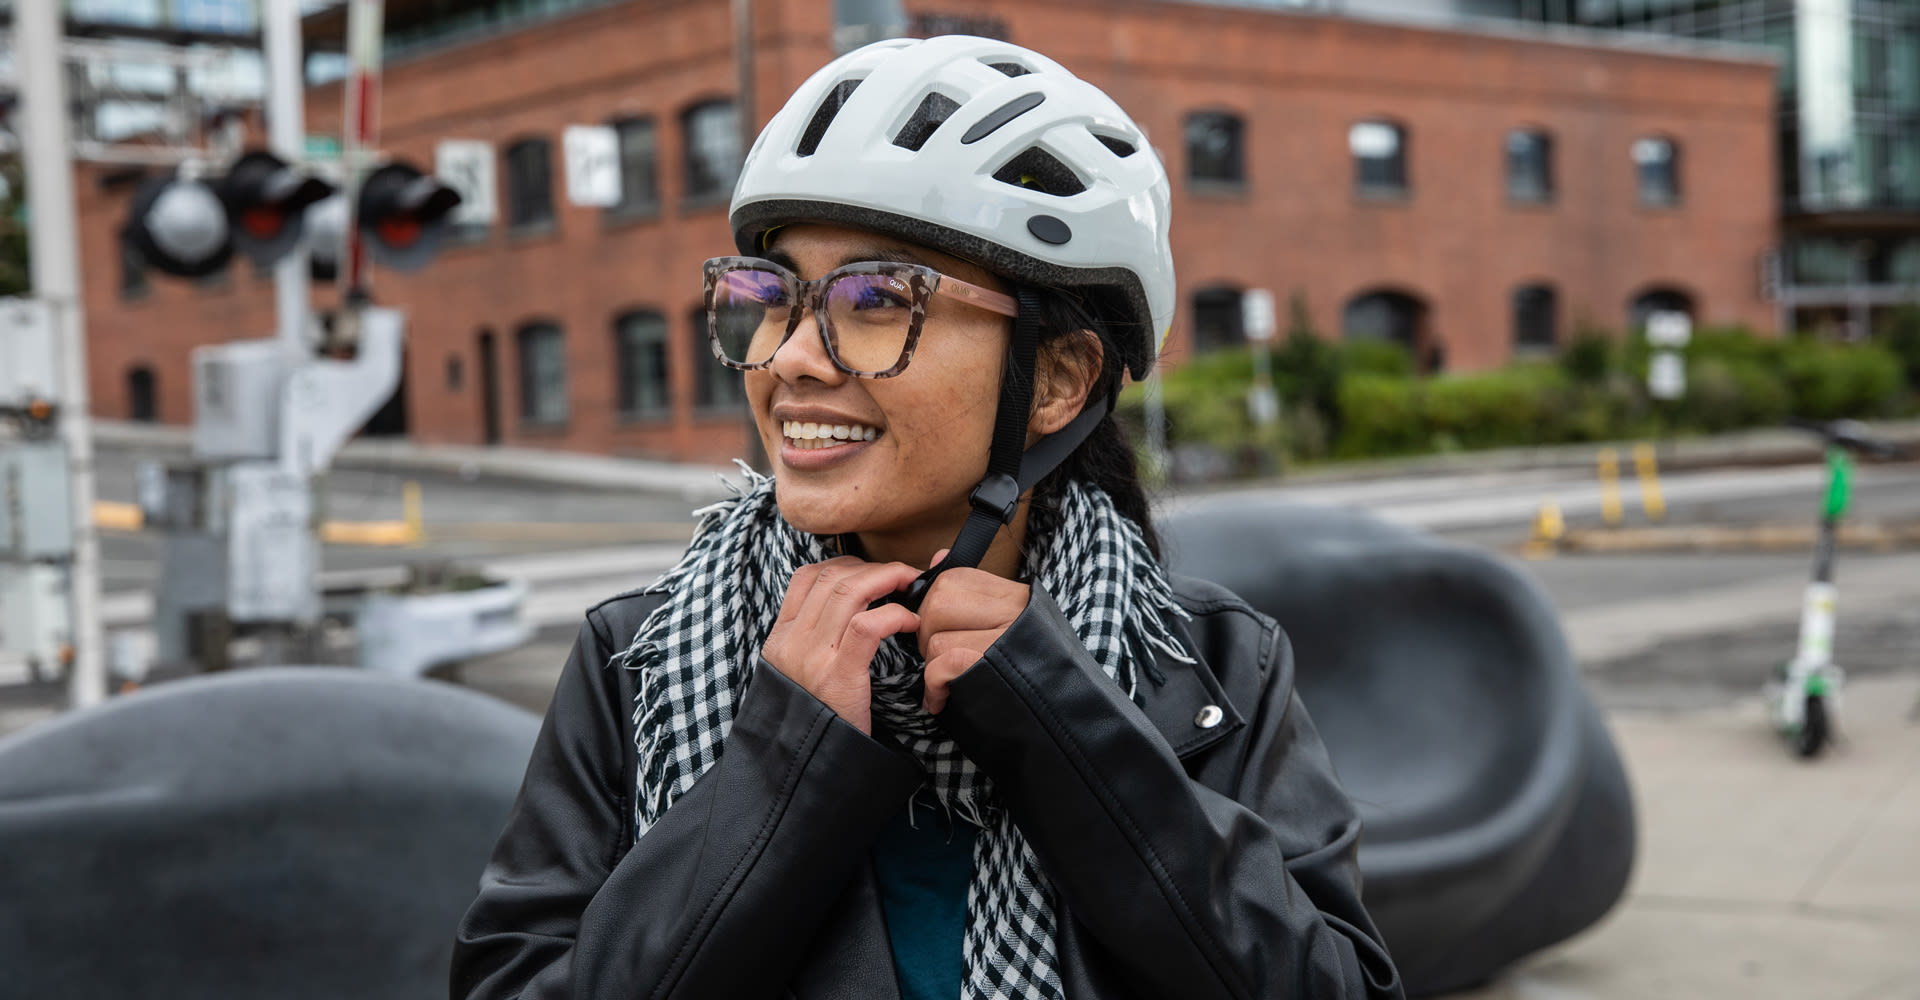 Bike Helmet Fit, Sizing, and Safety Guide